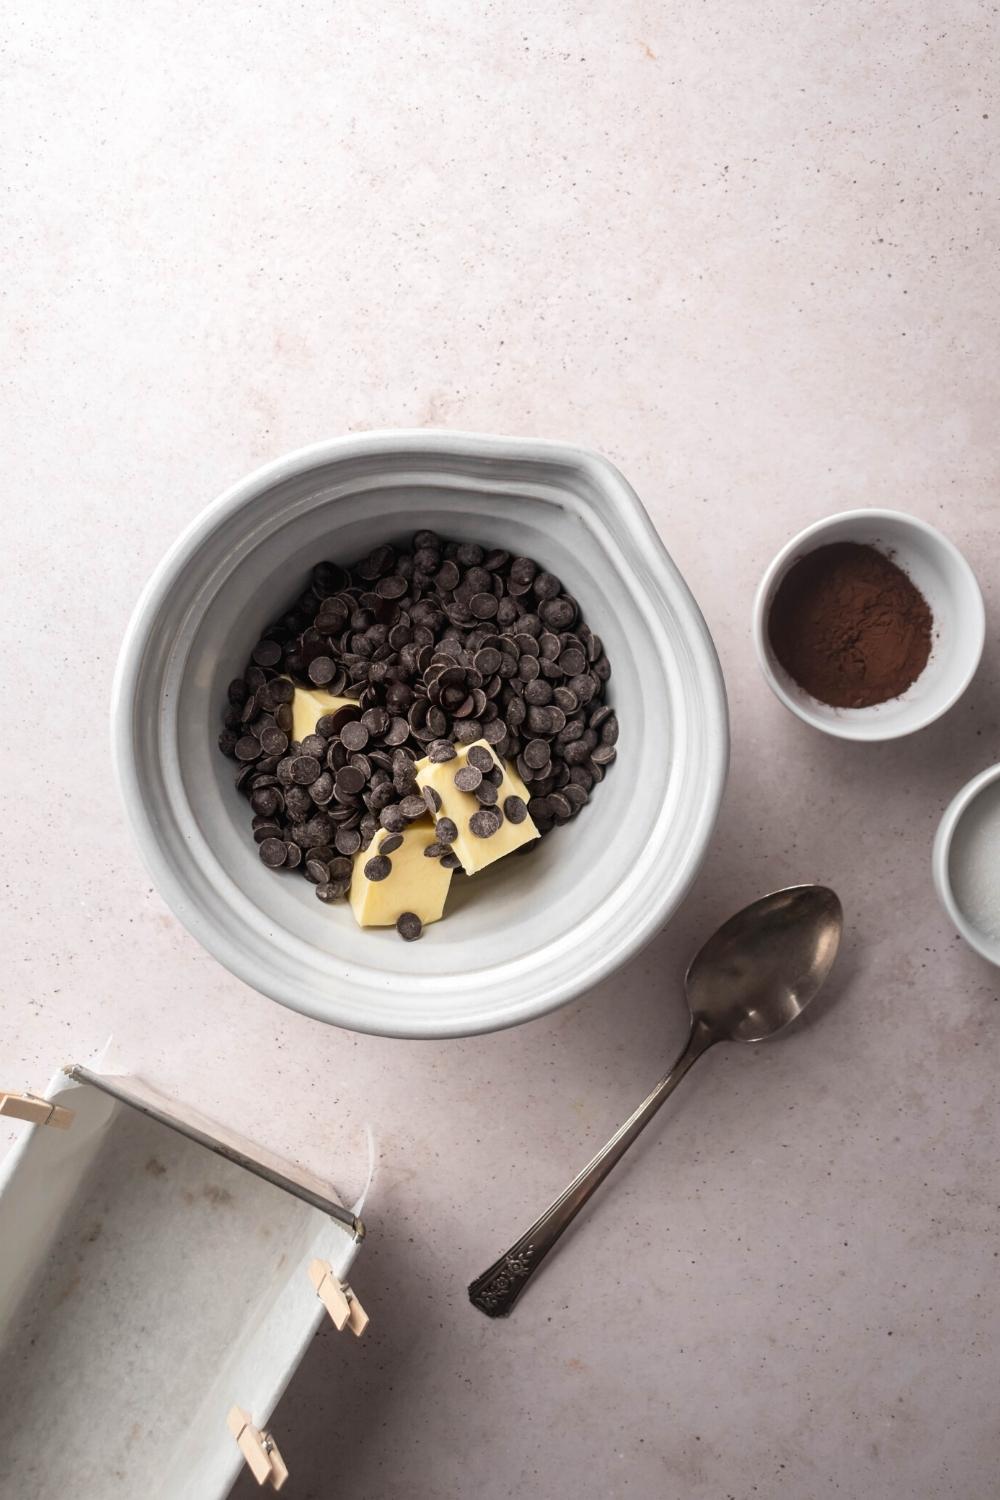 A white bowl with chocolate chips and butter in it. There is a small white bowl filled with cocoa powder next to it.